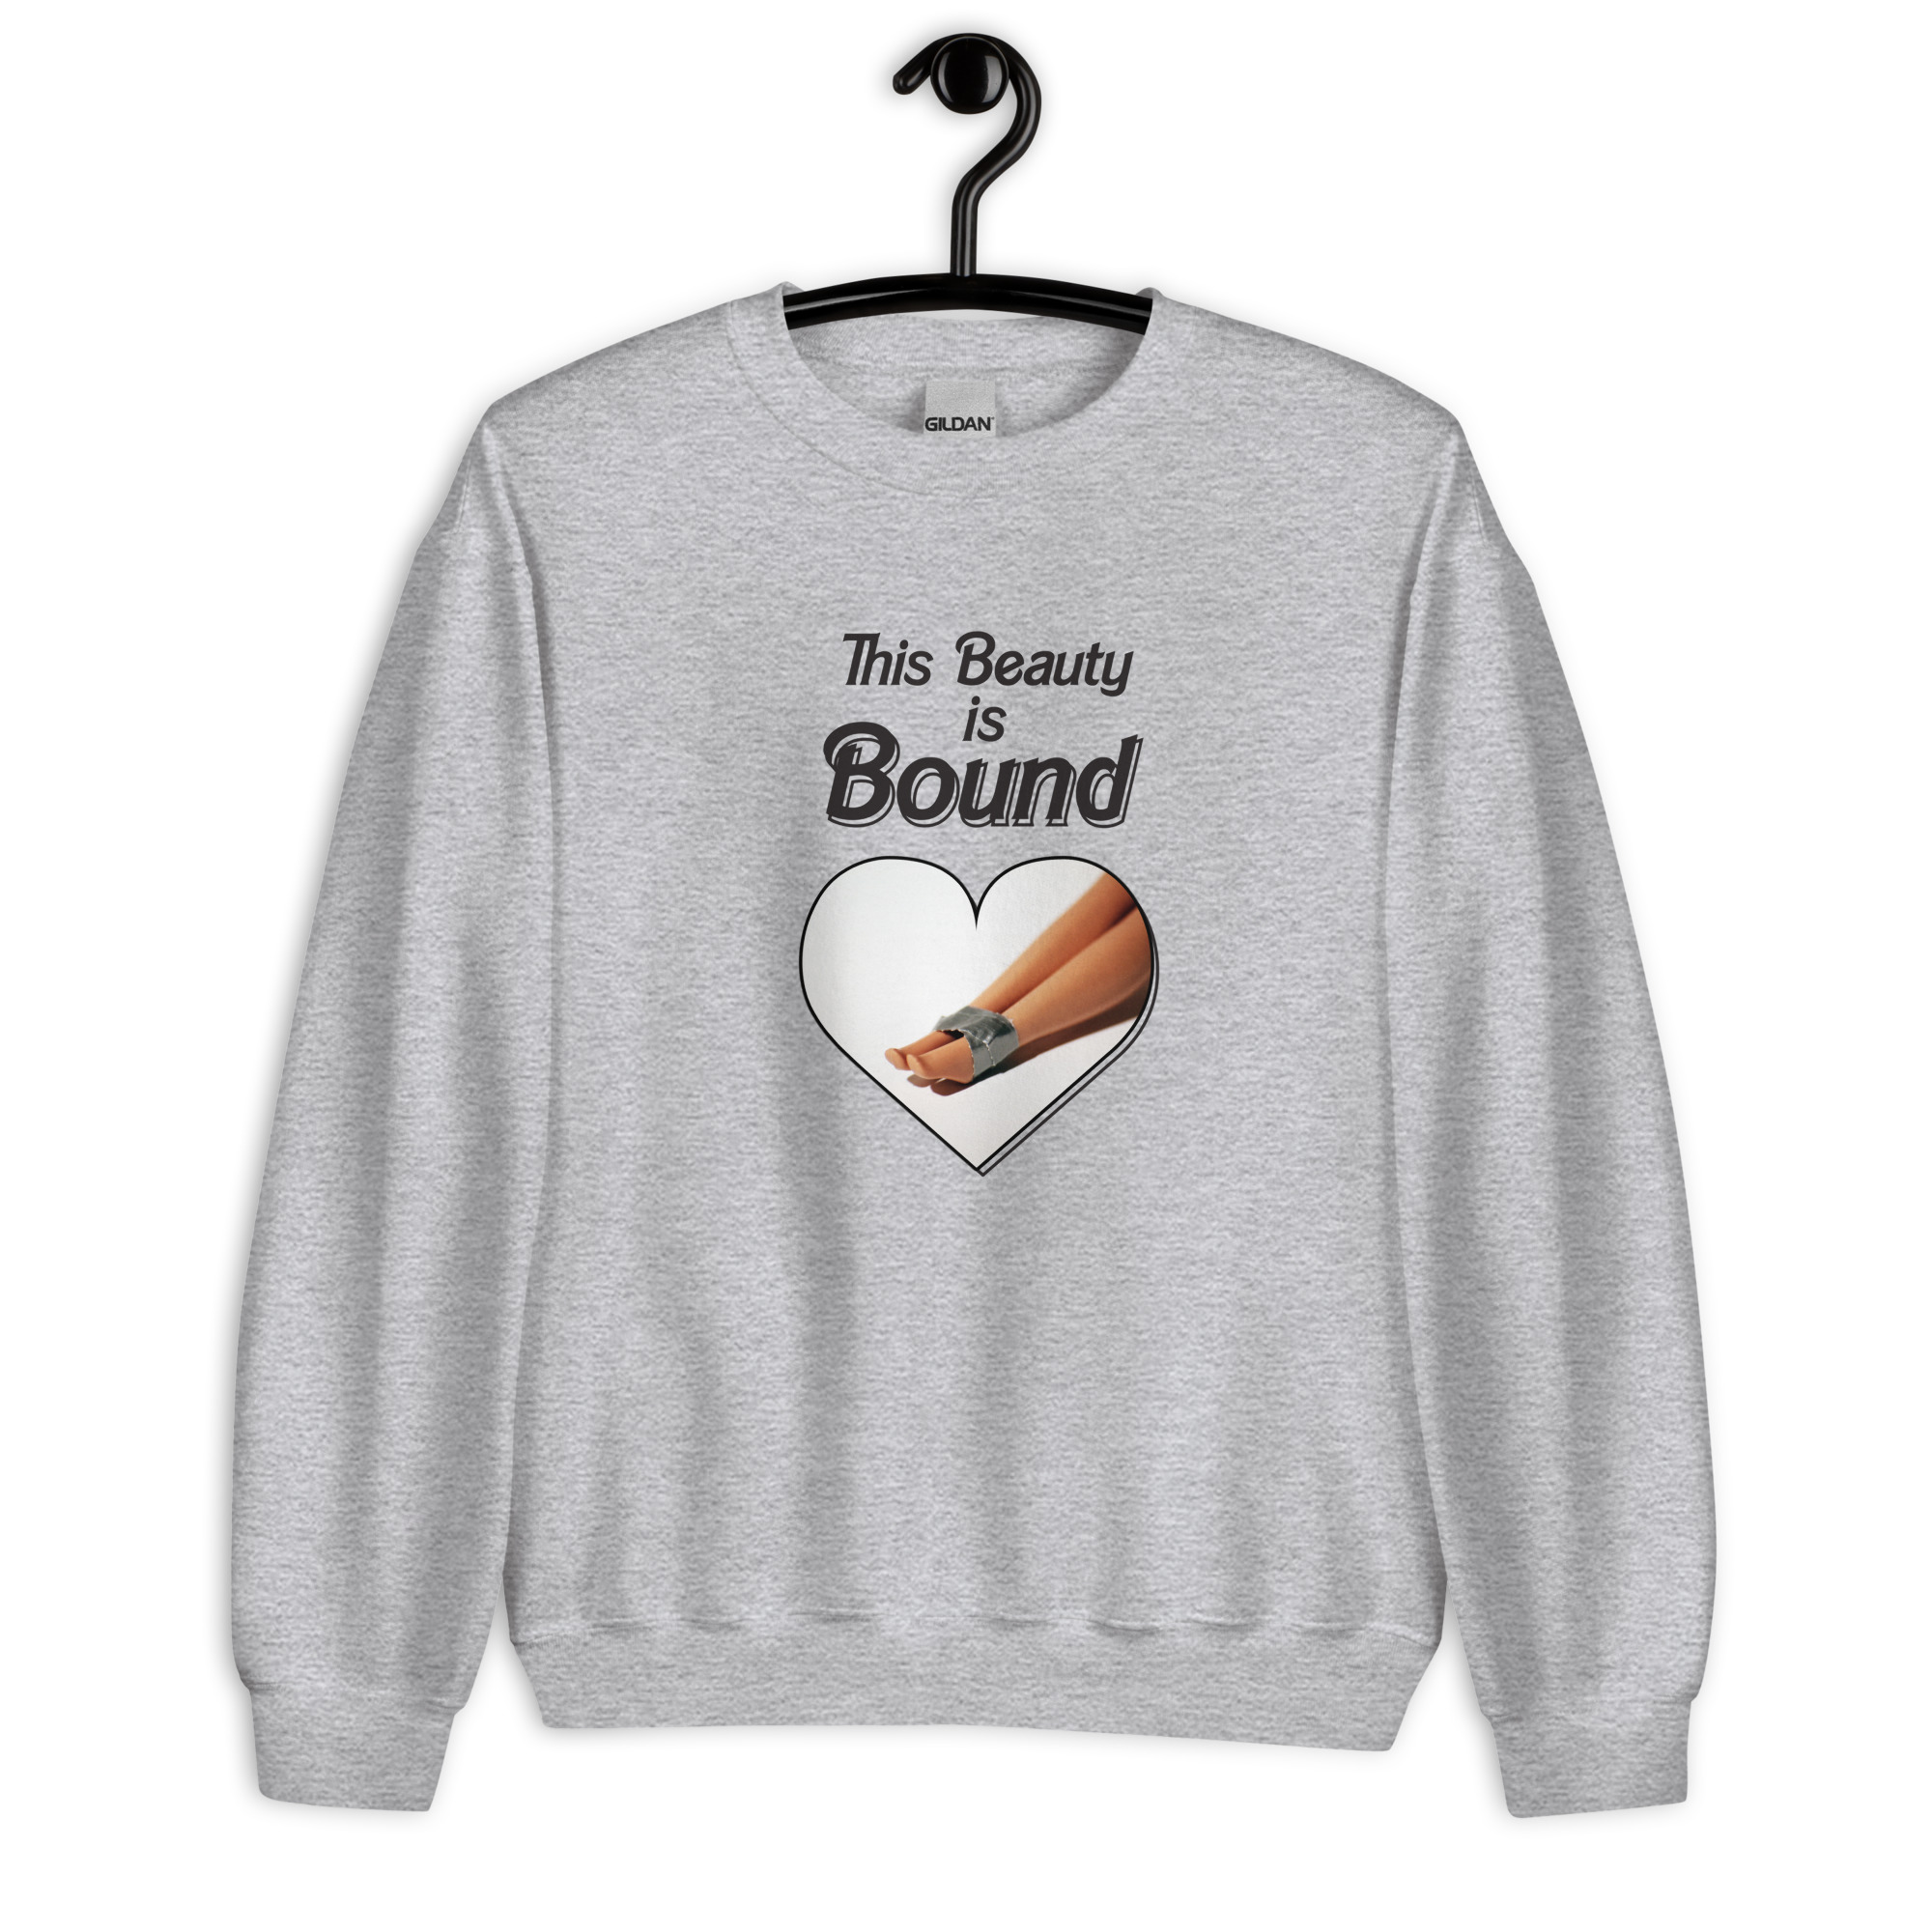 This Beauty is Bound sweatshirt by Wilde Designs